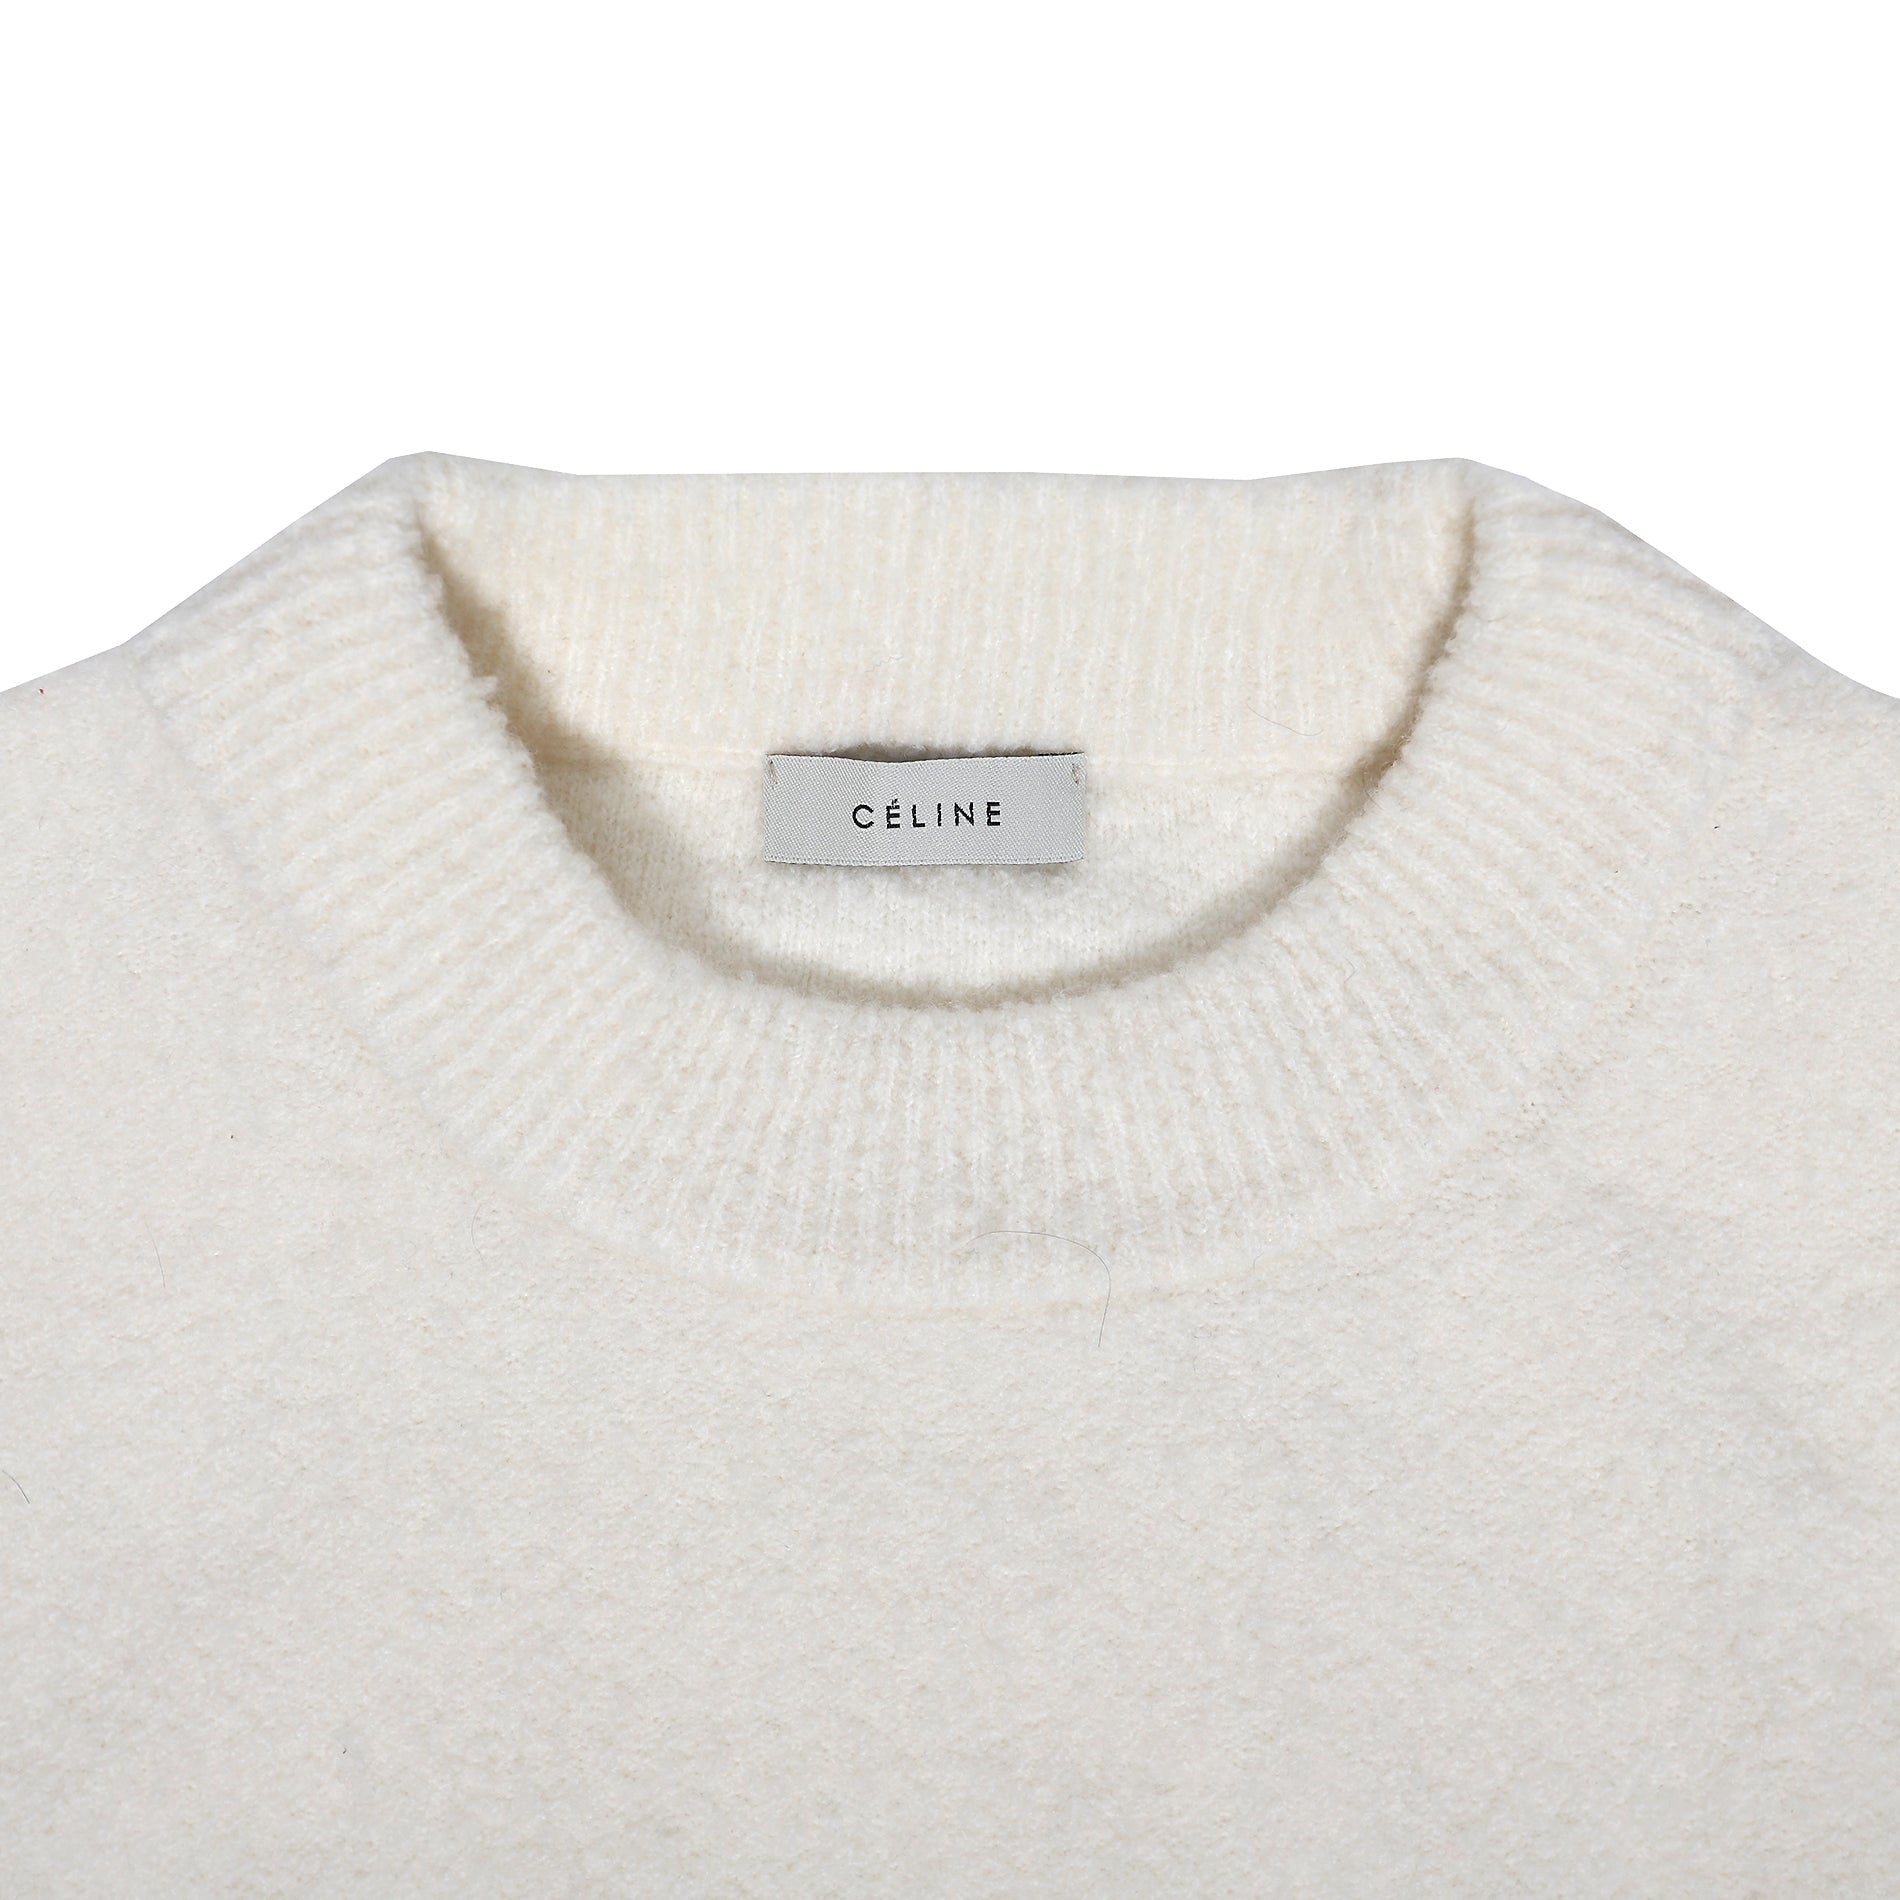 Celine by Phoebe Philo Fluffy White Knit Sweater